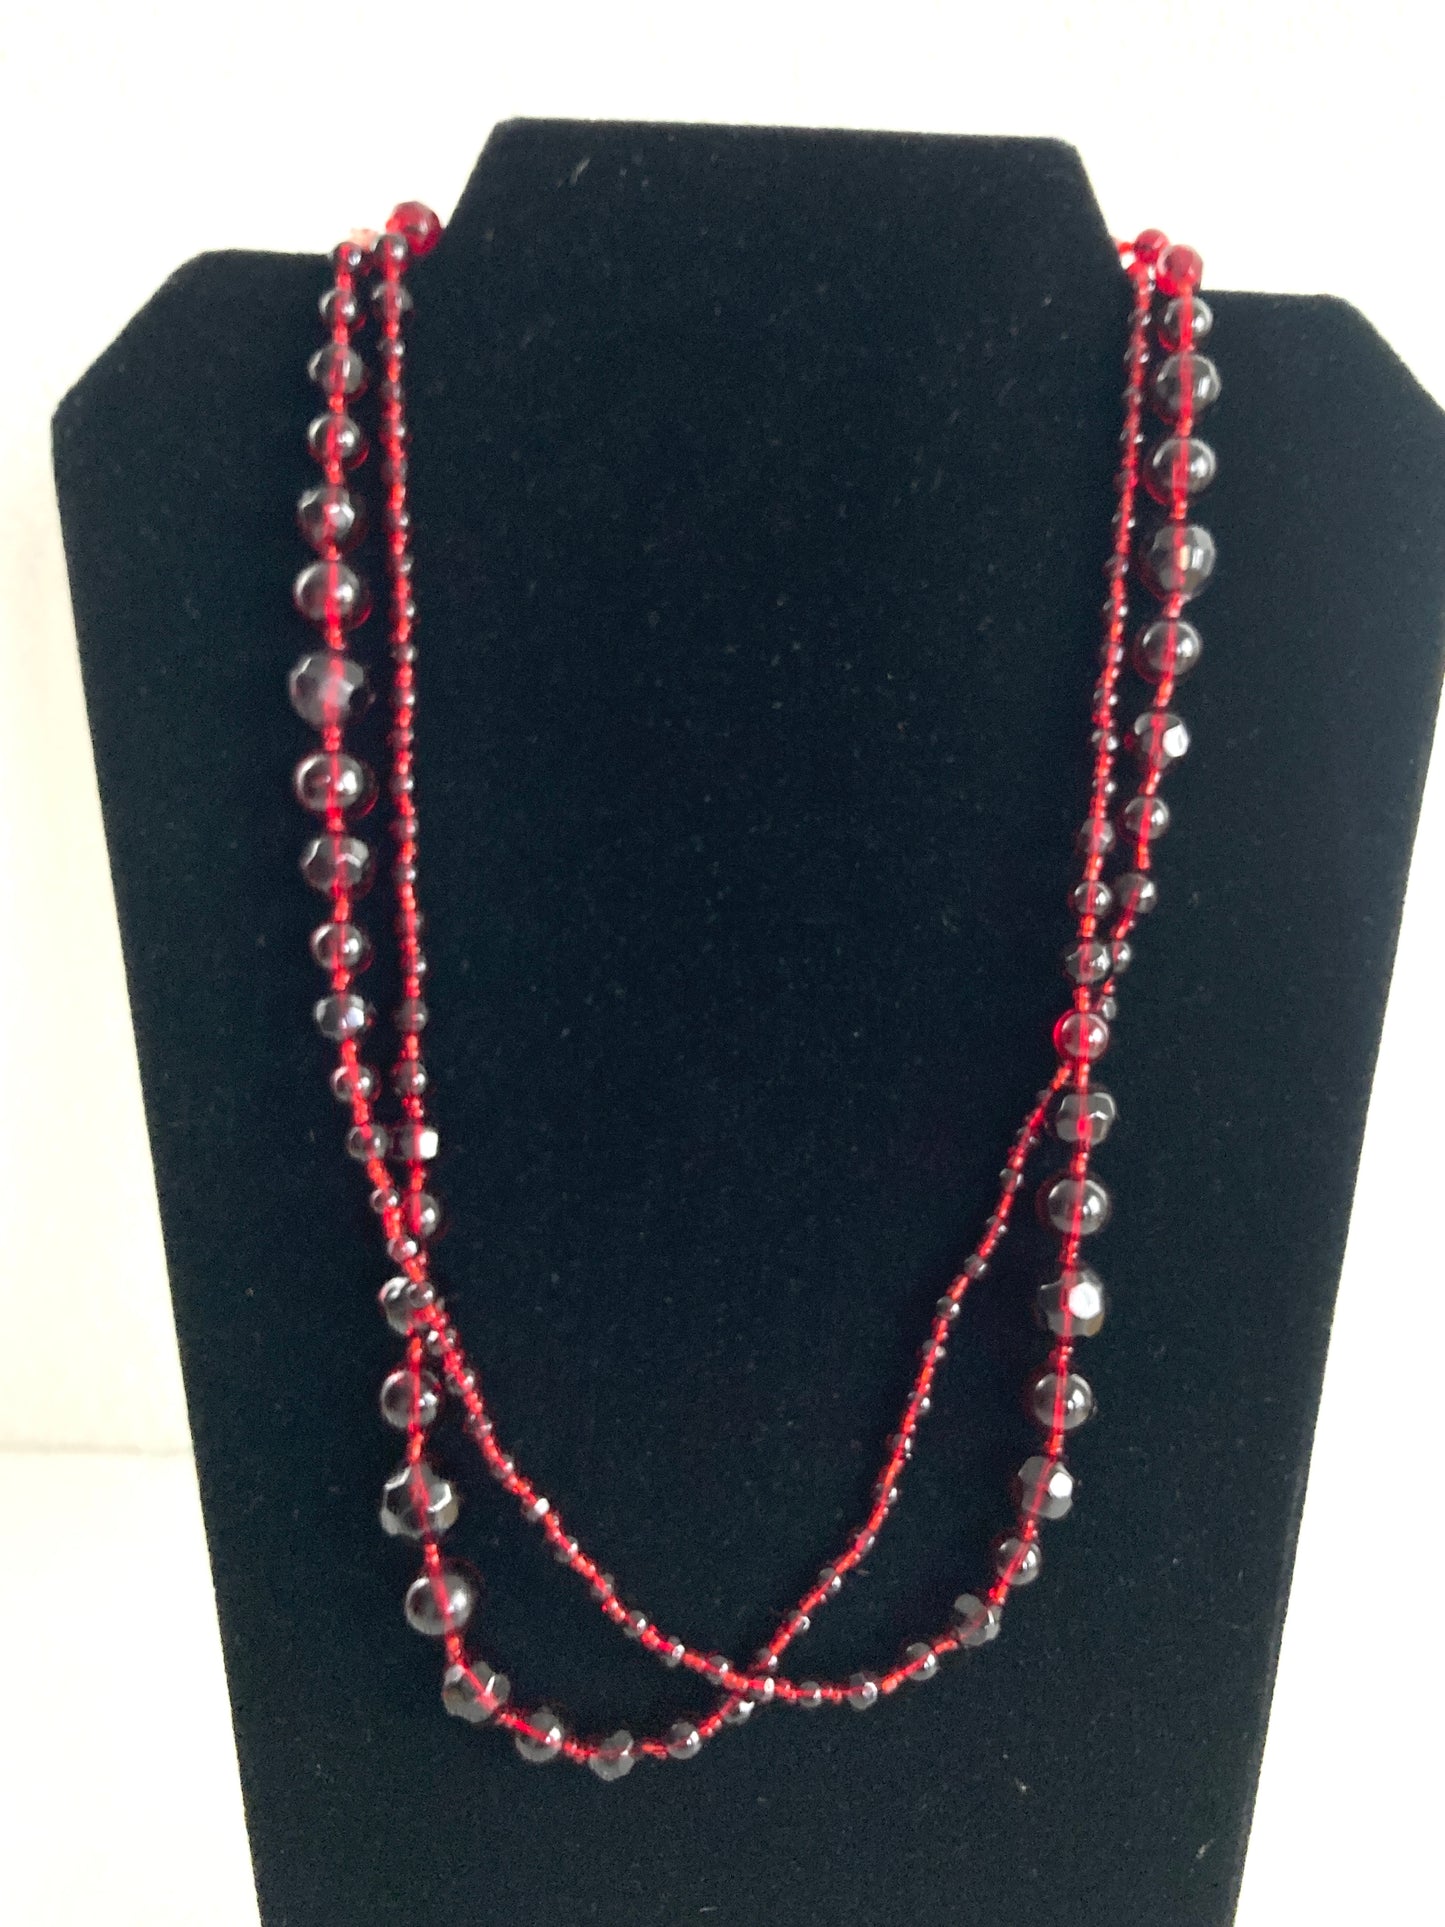 Endless Beaded Necklace